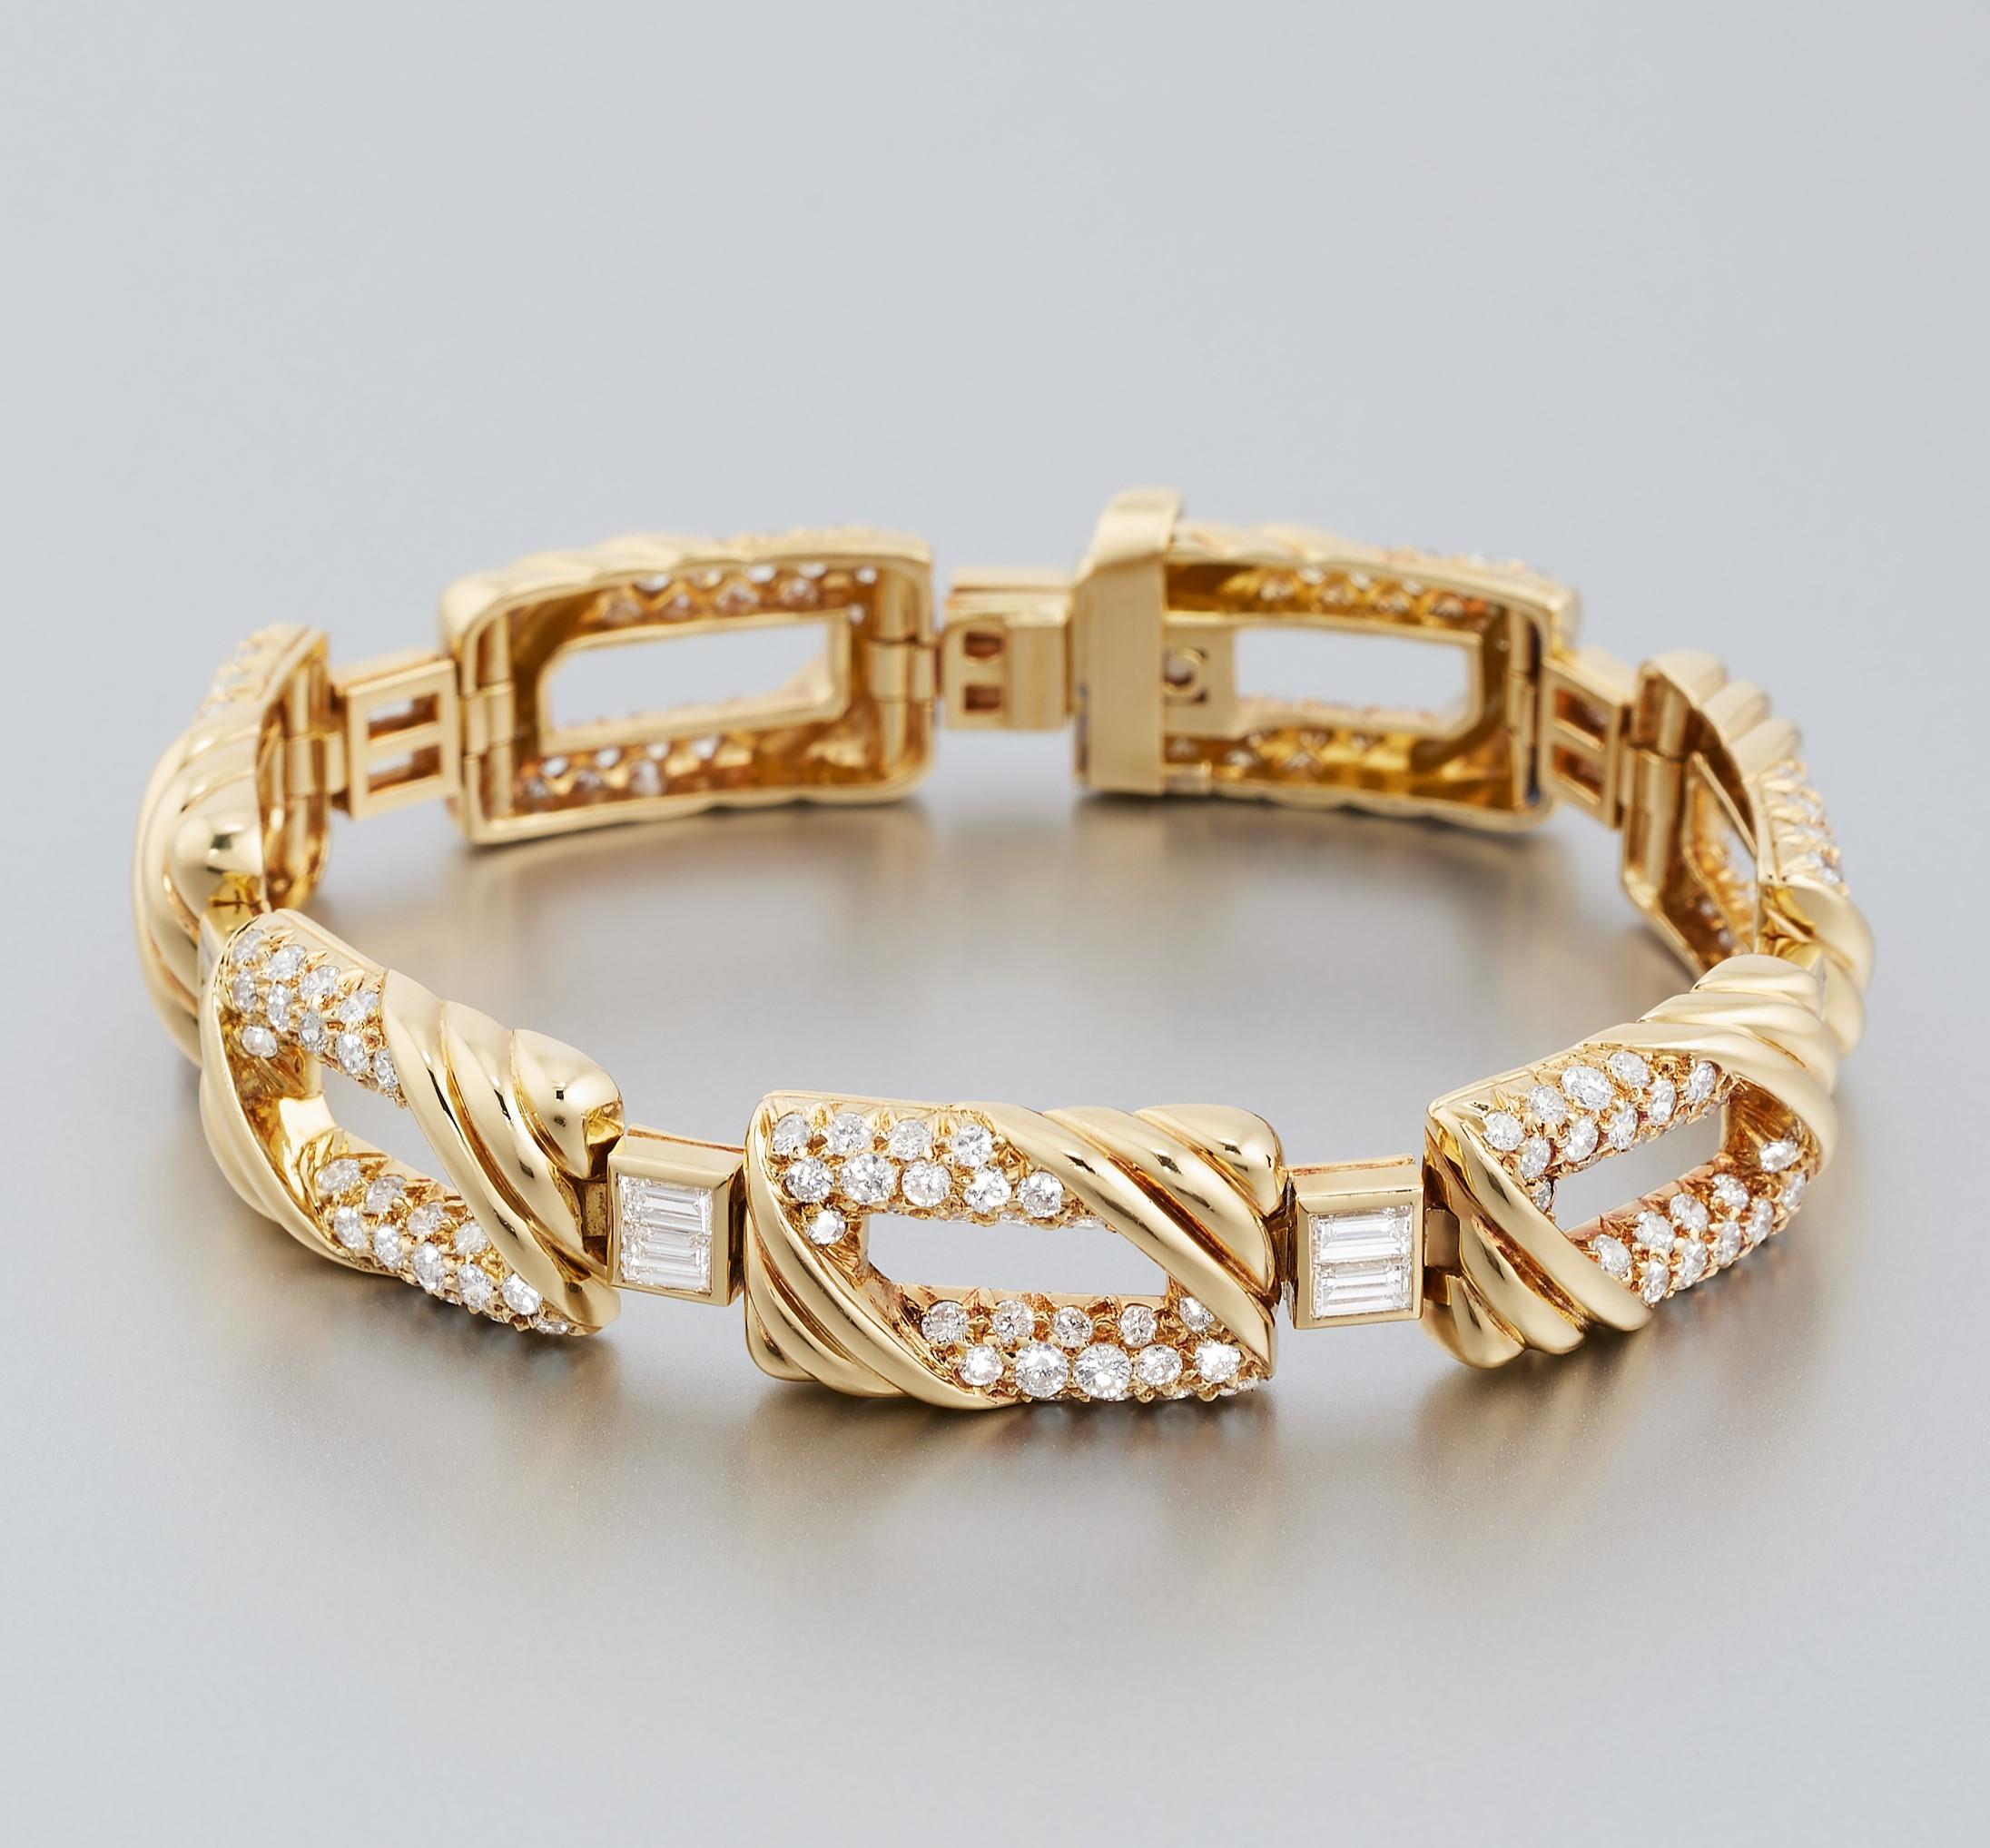 Exquisite vintage Mauboussin Paris diamond bracelet set in 18 karat yellow gold. The bracelet boasts approximately 7 carats of sparkling diamonds of high color and clarity (F to G / VVS to VS) set in shimmering 18 karat yellow gold. It features an